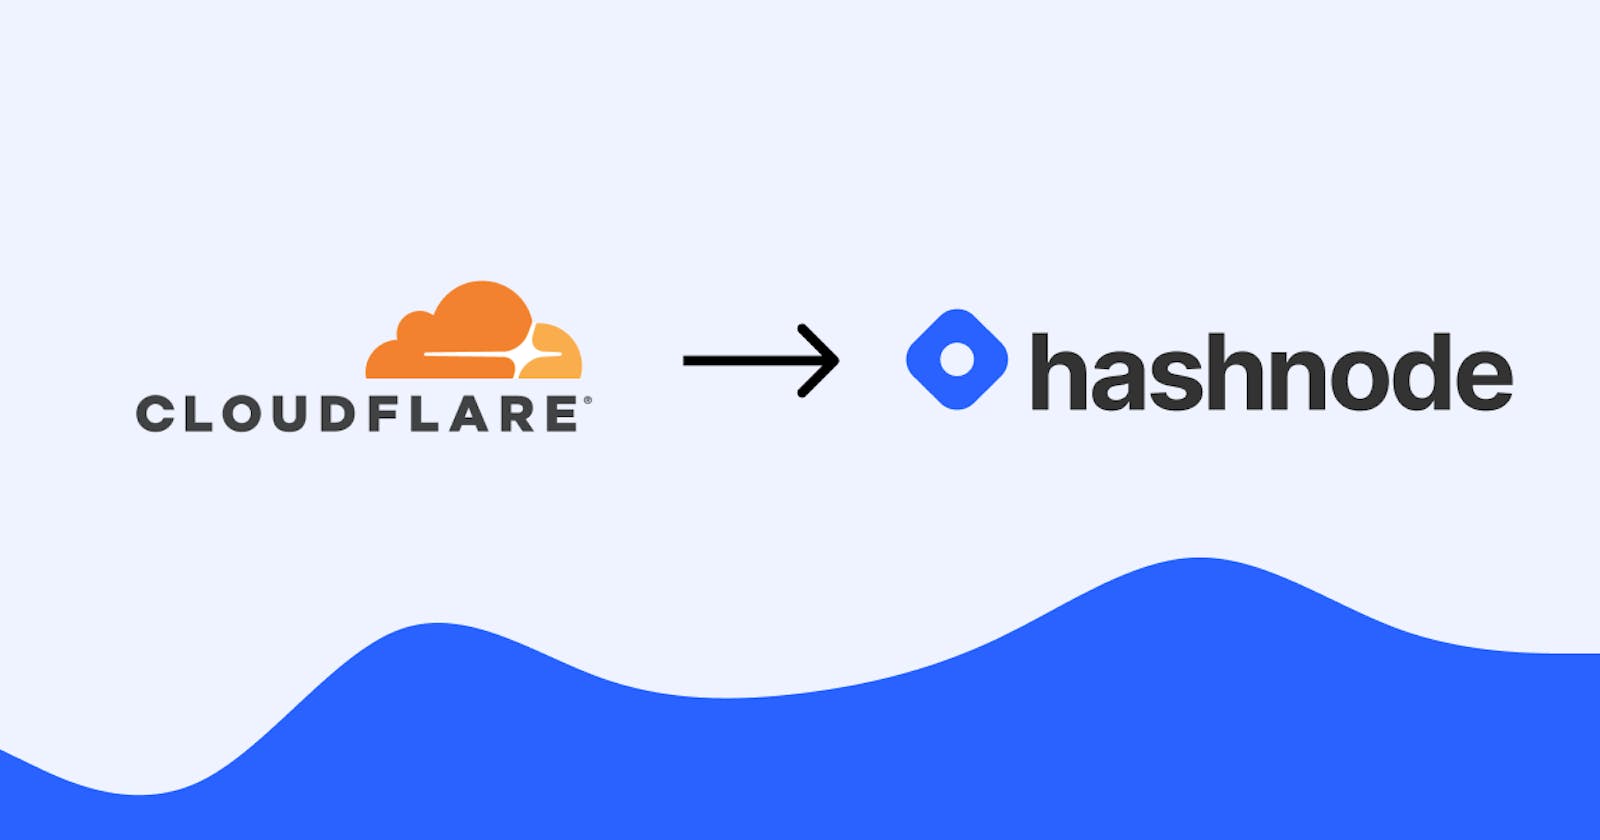 How to map a domain to Hashnode through Cloudflare?